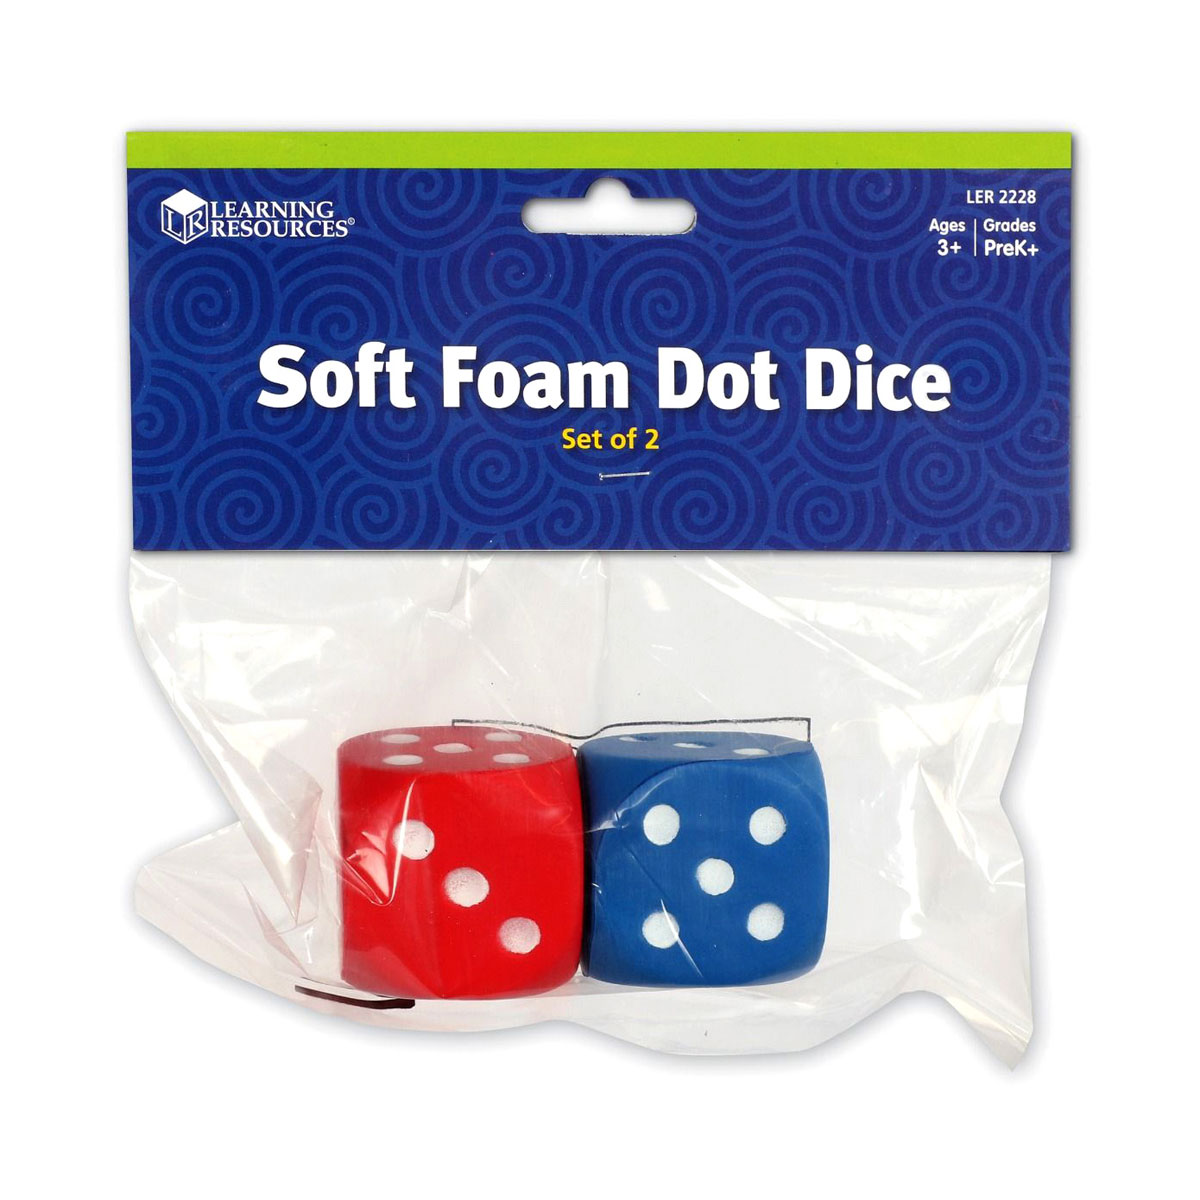 Learning Resources Soft Foam Dot Dice Set of 200 